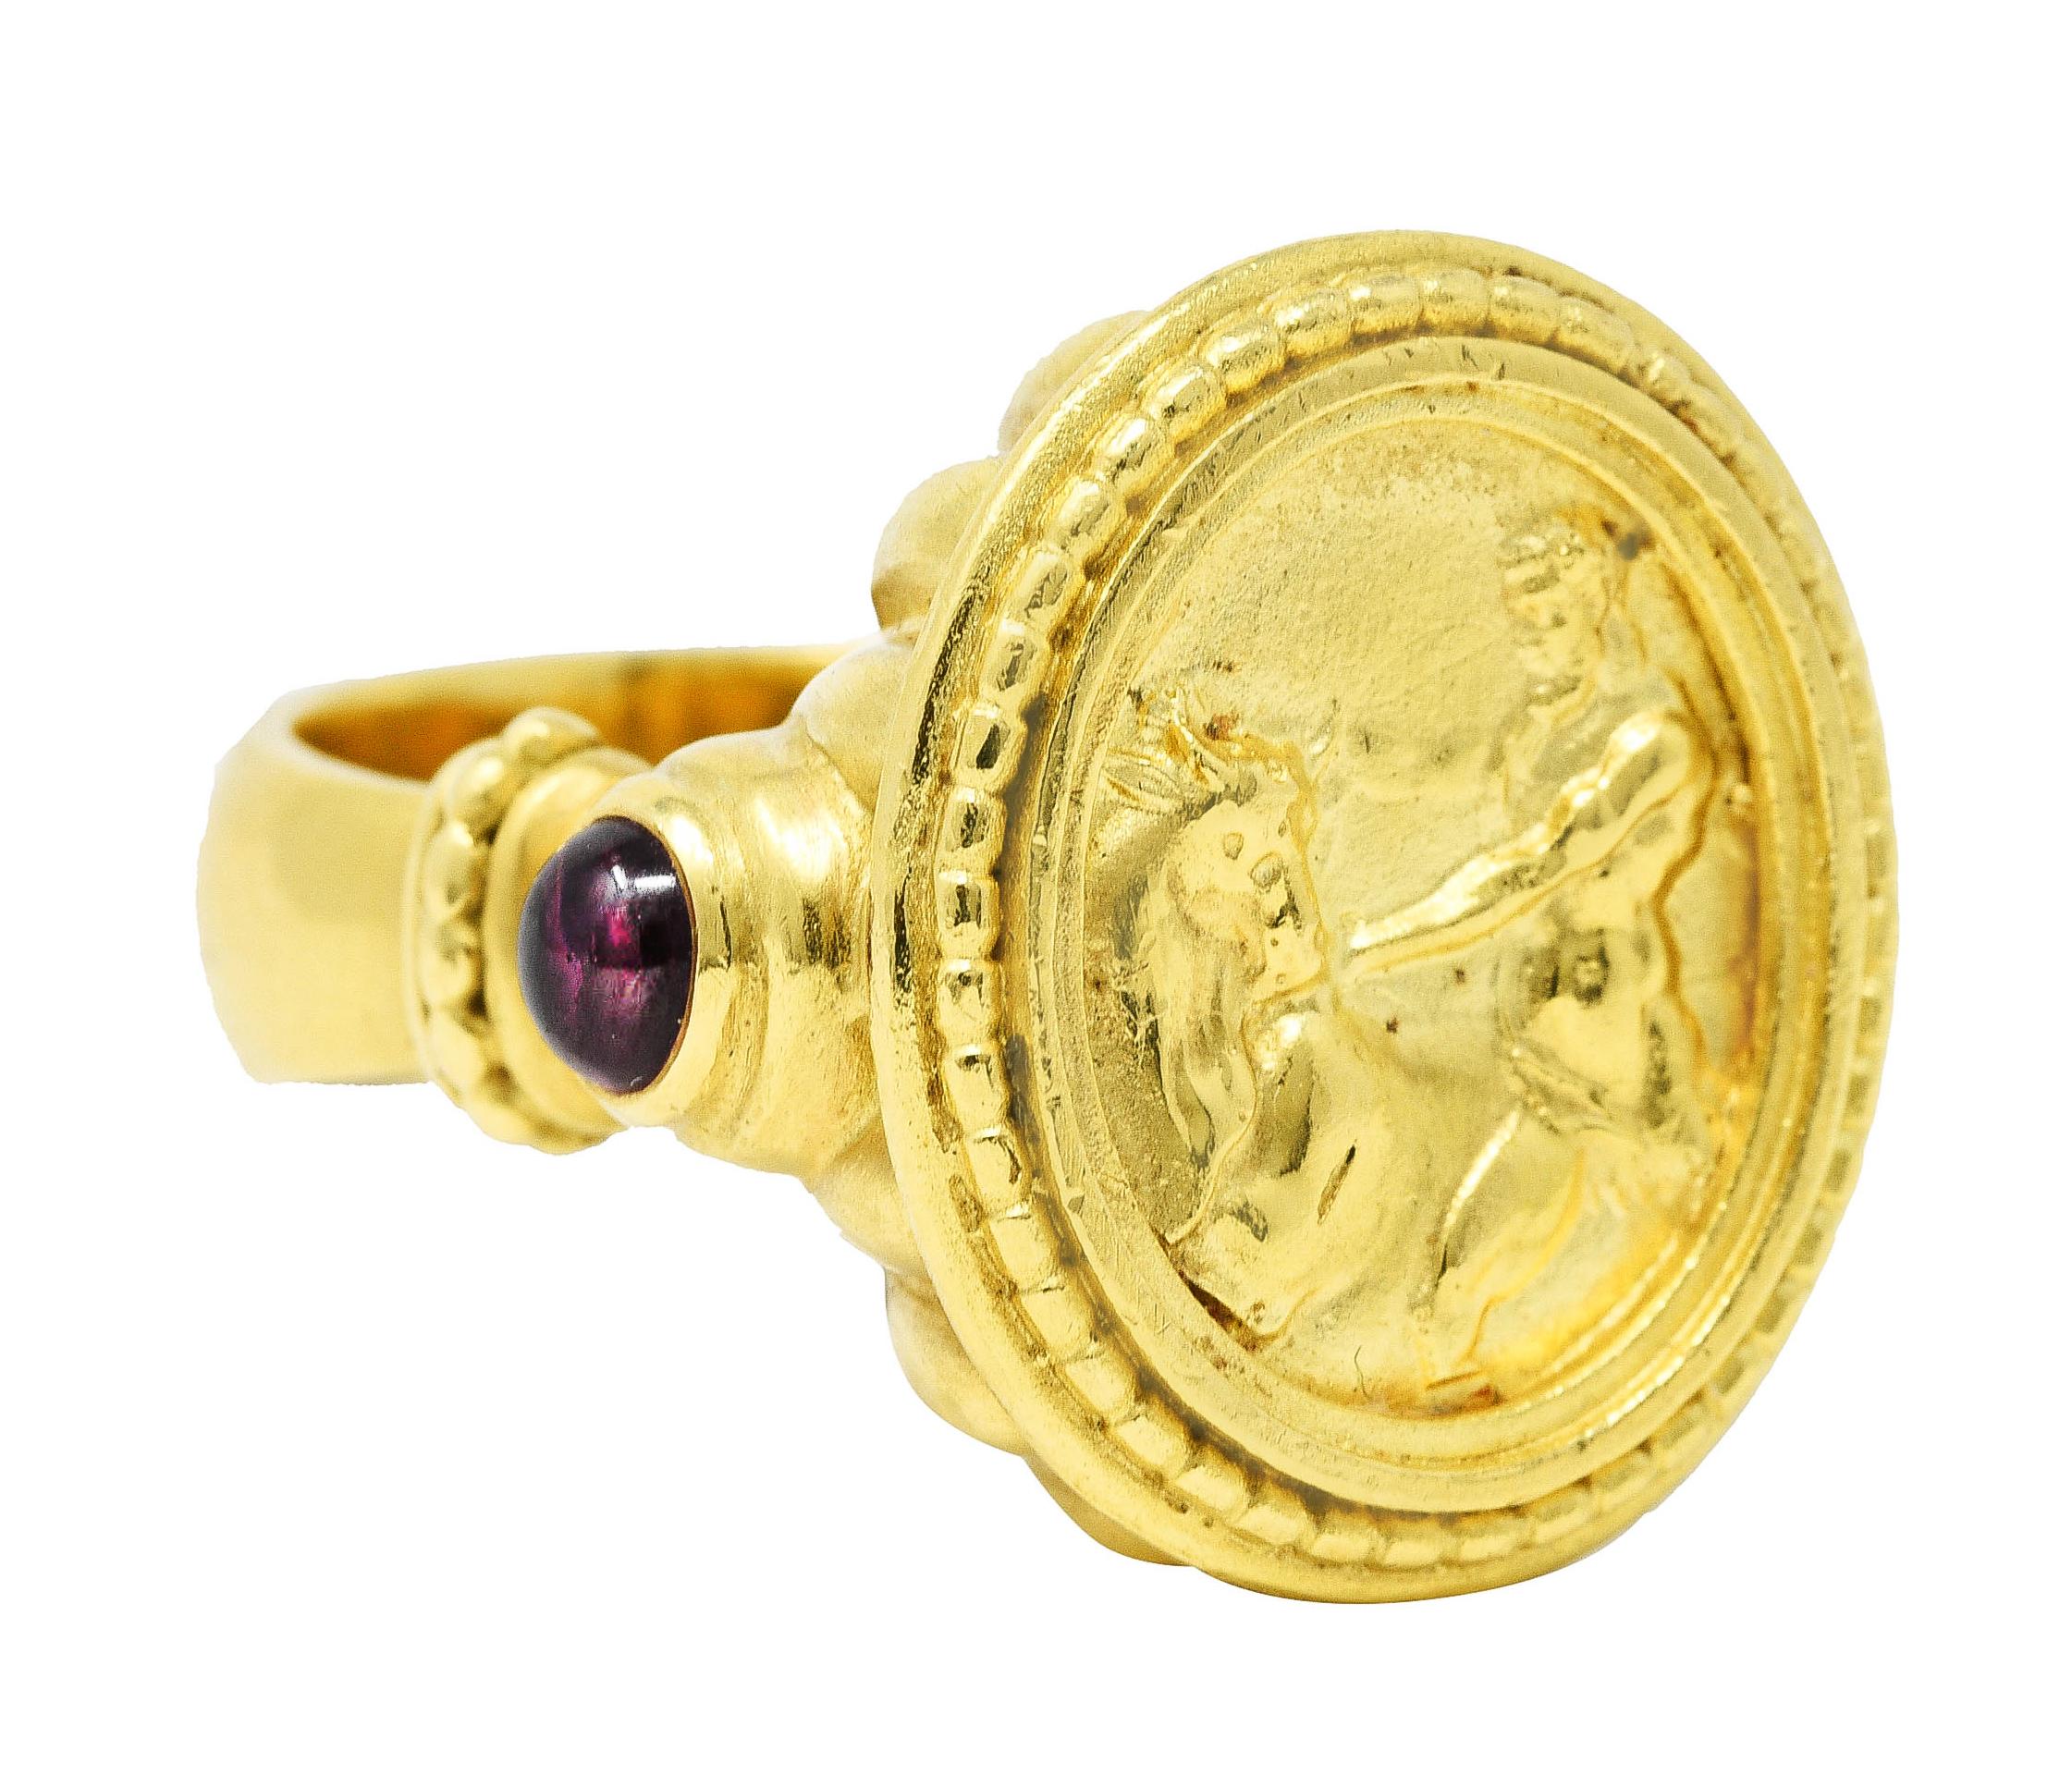 Ring centers a recessed gold cameo of the Greek hero Hercules and the Cretan bull

Accented by textured gold frame surround and deeply ridged basket

Shoulders feature 3.5 mm round bezel set garnet cabochons

Transparent purplish red in color with